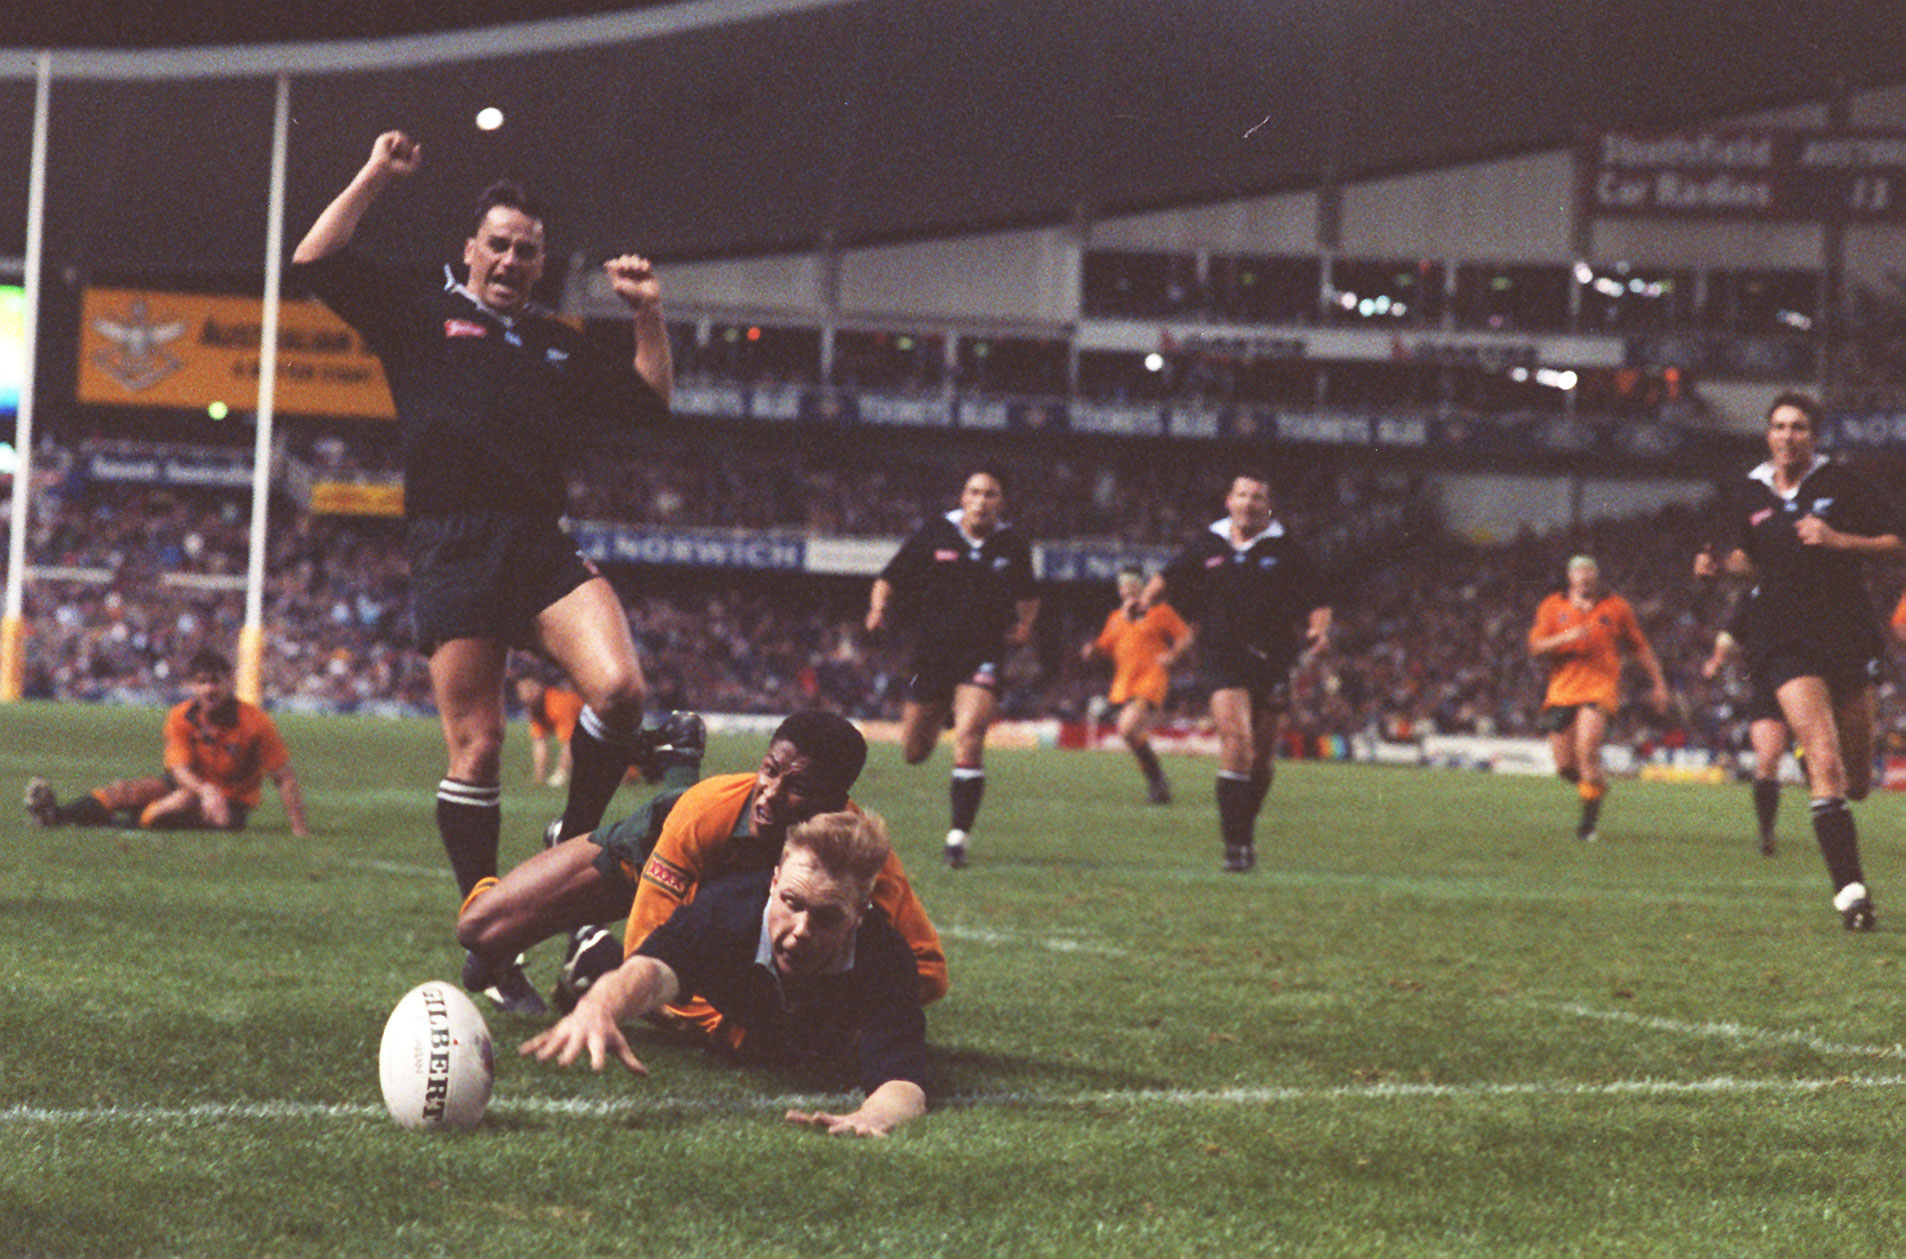 George Gregan's famous tackle on Jeff Wilson in 1994.